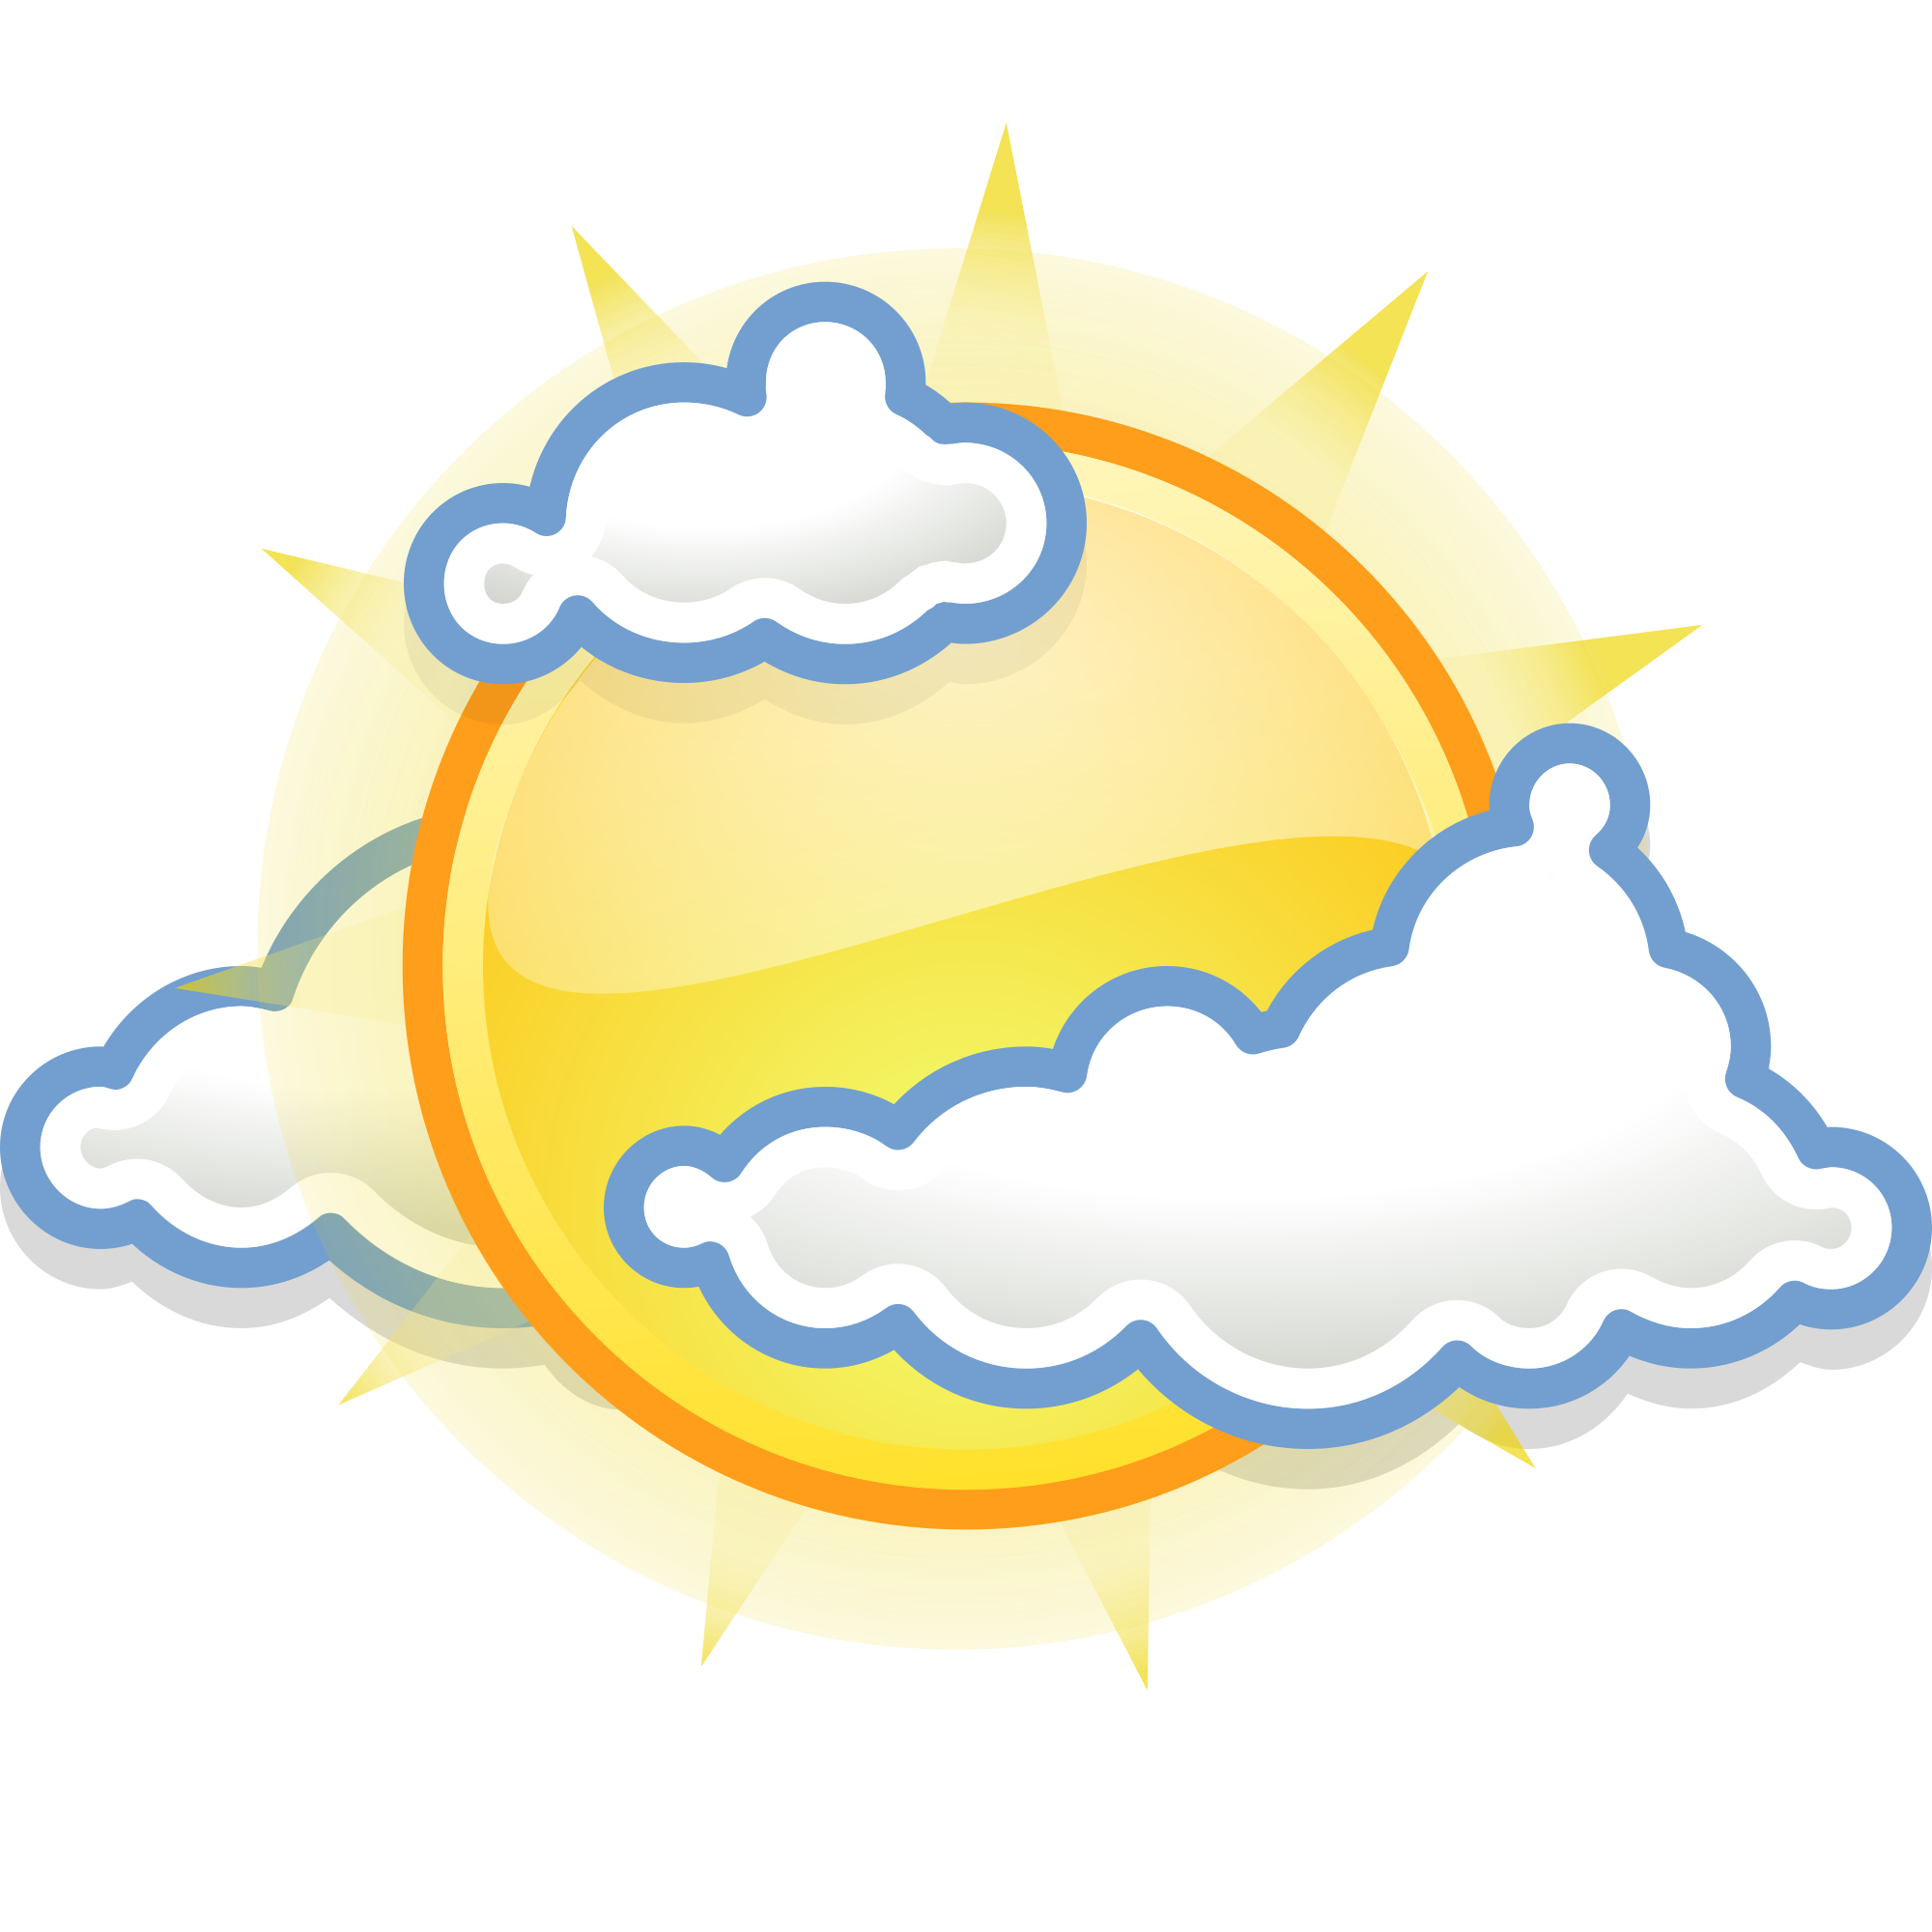 Scattering clouds clipart - Clipground